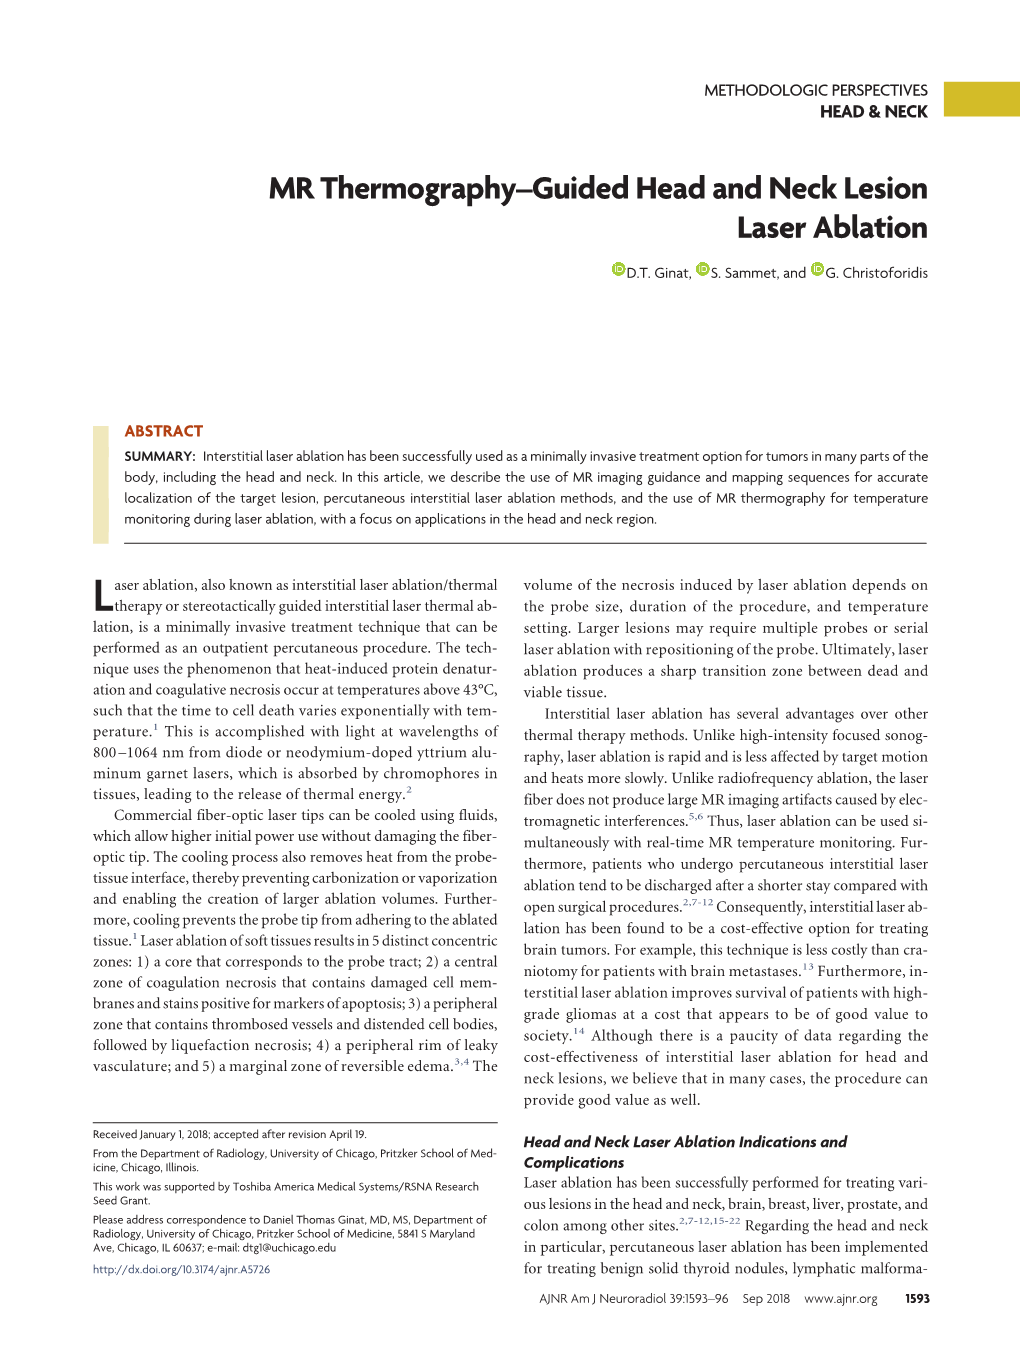 MR Thermography–Guided Head and Neck Lesion Laser Ablation